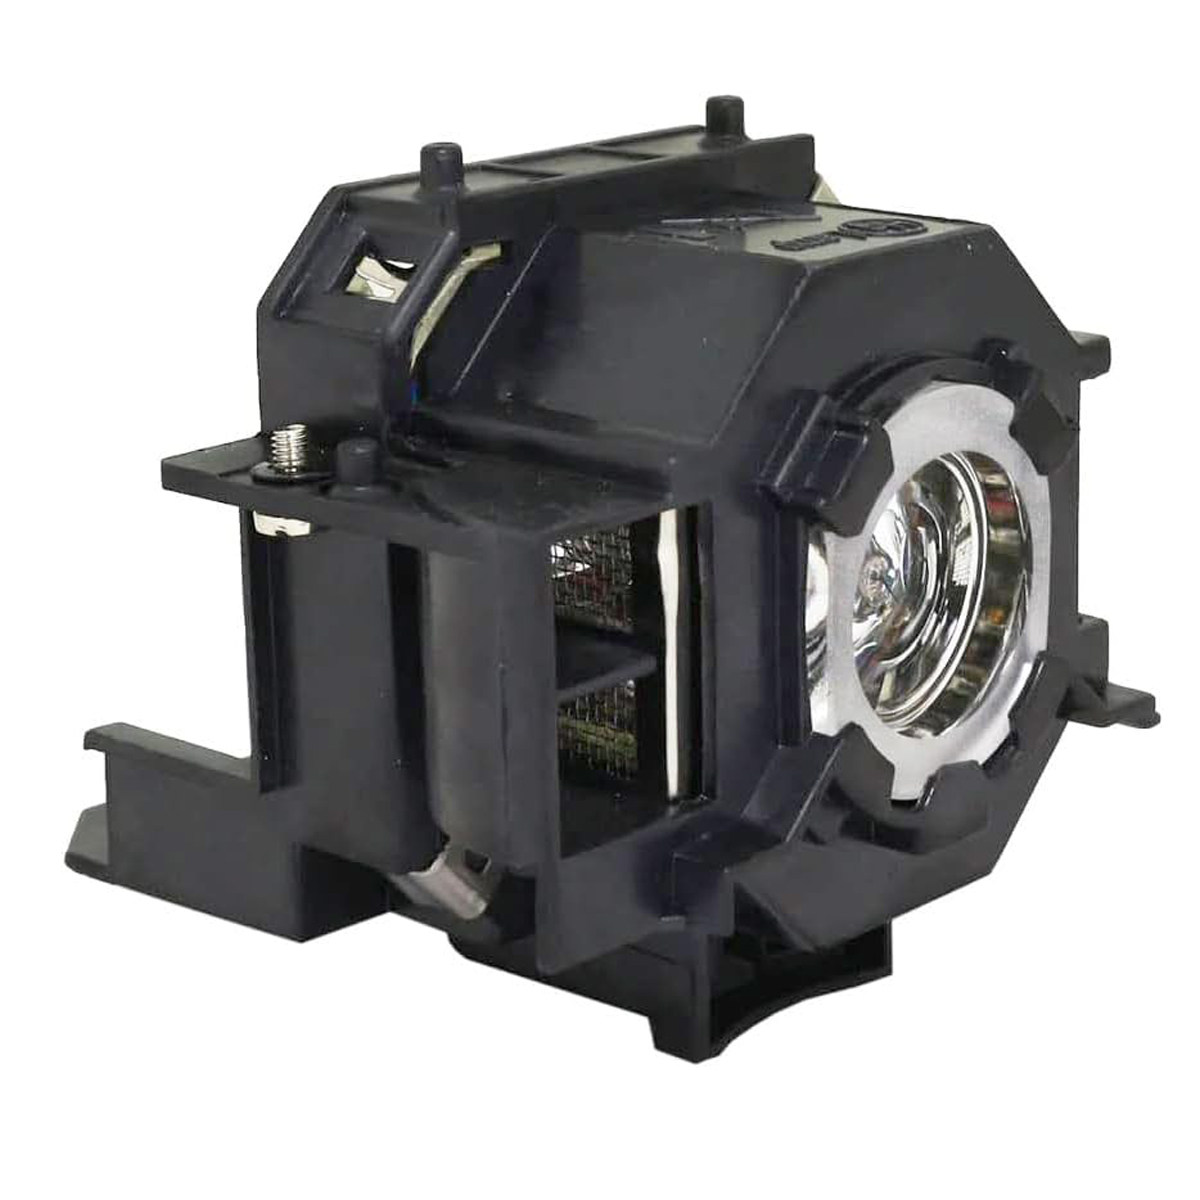 Replacement Projector lamp ELPLP42 For Epson EB-400W EB-400WE EMP-270 EMP-280 EMP-400